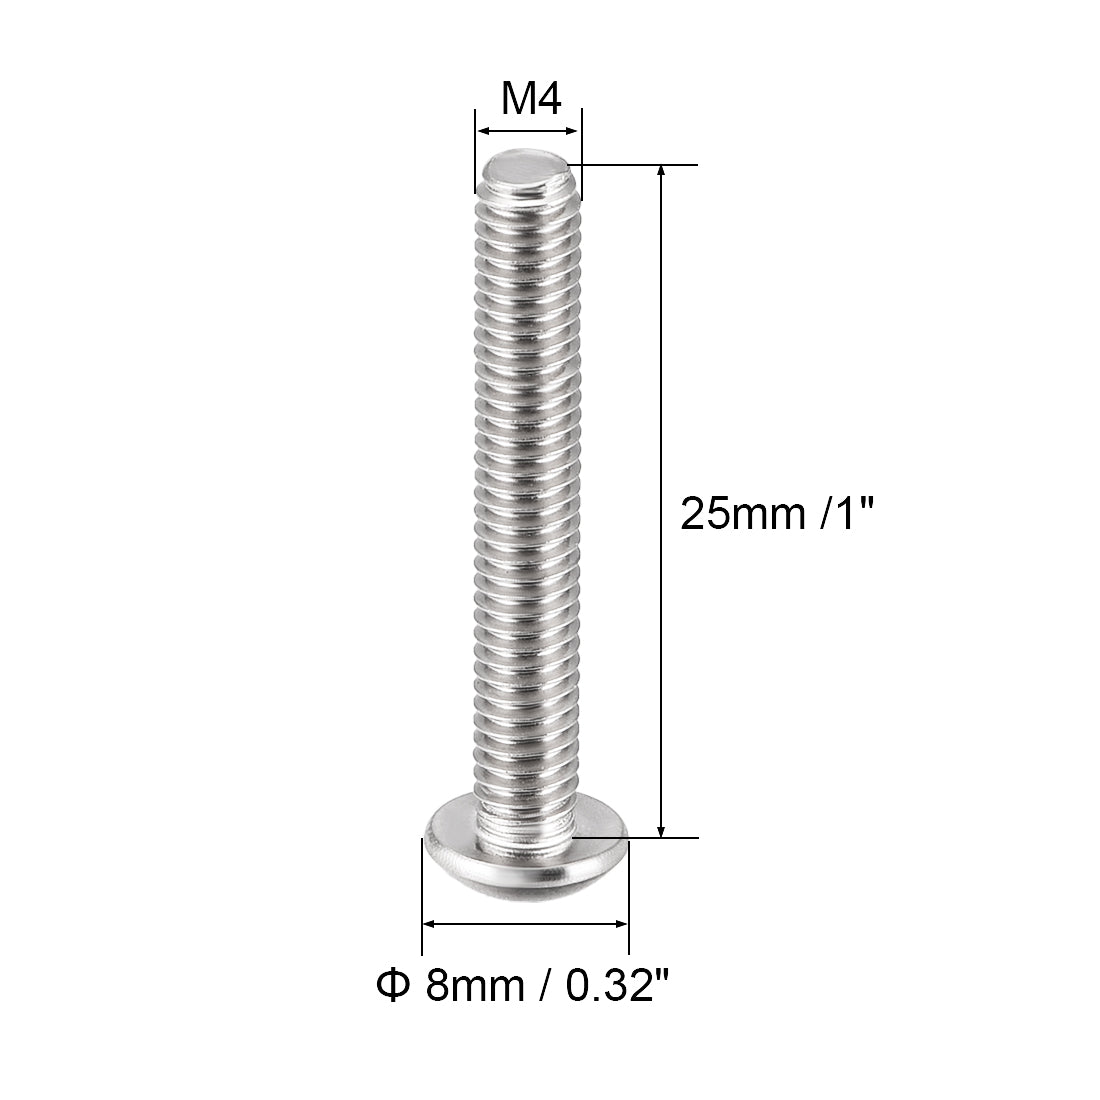 uxcell Uxcell M4x25mm Machine Screws Hex Socket Round Head Screw 304 Stainless Steel Fasteners Bolts 20pcs